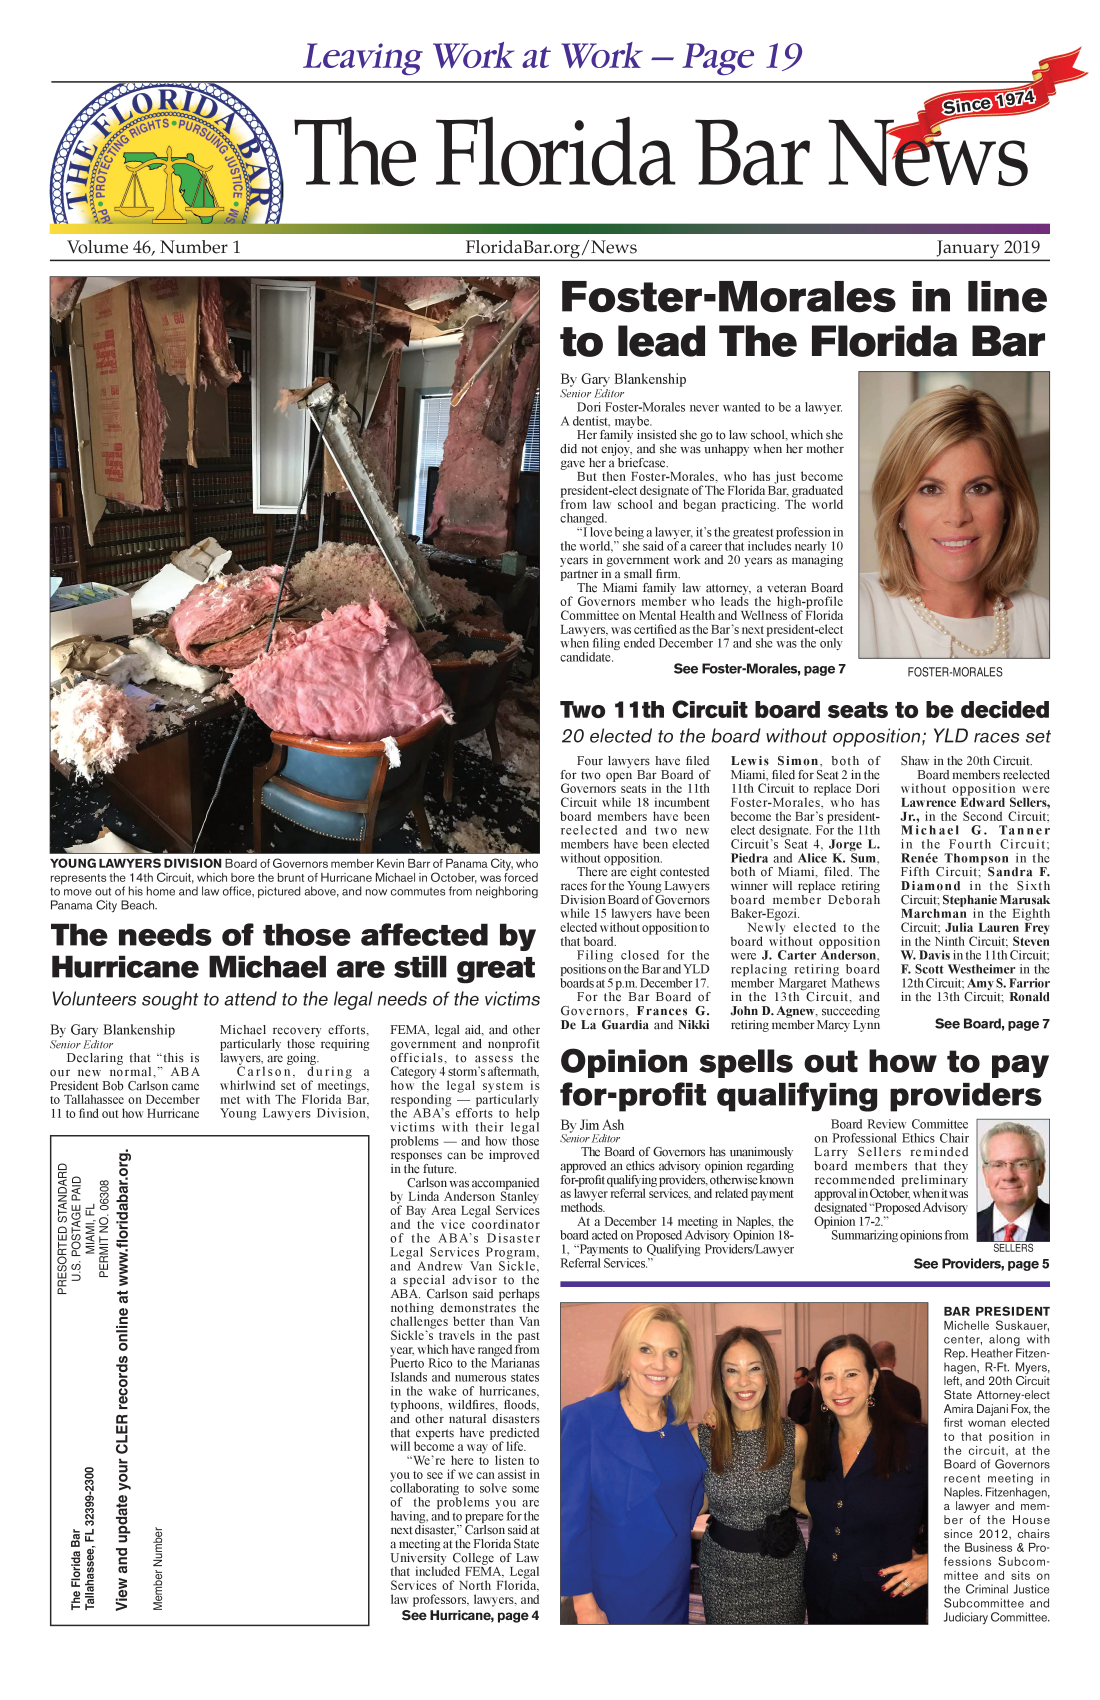 handle is hein.barjournals/flabn0046 and id is 1 raw text is: 


Leaving Work at Work - Page 19


Volume 46, Number 1


        Ptl                                                                                     Since    1974

Te Forida Bars


FloridaBar.org/News


January   2019


Foster-Morales in line


to lead The Florida Bar

By Gary Blankenship
Senior Editor
   Dori Foster-Morales never wanted to be a lawyer.
A dentist, maybe.
   Her family insisted she go to law school, which she
did not enjoy, and she was unhappy when her mother
gave her a briefcase.
   But then Foster-Morales, who has just become
president-elect designate of The Florida Bar, graduated
from law school and began practicing. The world
changed.
   I love being a lawyer, it's the greatest profession in
the world, she said of a career that includes nearly 10
years in government work and 20 years as managing
partner in a small firm.
   The Miami family law attorney, a veteran Board
of Governors member who  leads the high-profile
Committee on Mental Health and Wellness of Florida
Lawyers, was certified as the Bar's next president-elect
when filing ended December 17 and she was the only
candidate.
                 See  Foster-Morales, page 7          FOSTER-MORALES


Two 11 th Circuit board seats to be decided

20   elected   to the  board without opposition; YLD races set


YOUNG   LAWYERS   DIVISION Board of Governors member Kevin Barr of Panama City, who
represents the 1 4th Circuit, which bore the brunt of Hurricane Michael in October, was forced
to move out of his home and law office, pictured above, and now commutes from neighboring
Panama City Beach.

The needs of those affected by

Hurricane Michael are still great

Volunteers sought to attend to the legal needs of the victims


By Gary Blankenship
Senior Editor
   Declaring that this is
our new  normal,  ABA
President Bob Carlson came
to Tallahassee on December
11 to find out how Hurricane


Michael recovery efforts,
particularly those requiring
lawyers, are going.
   Carlson,   during  a
whirlwind set of meetings,
met with The Florida Bar,
Young  Lawyers Division,


FEMA,  legal aid, and other
government and nonprofit
officials, to assess the
Category 4 storm's aftermath,
how  the legal system is
responding - particularly
the ABA's efforts to help
victims with their legal
problems - and how those
responses can be improved
in the future.
   Carlson was accompanied
by Linda Anderson Stanley
of Bay Area Legal Services
and the vice coordinator
of the  ABA's  Disaster
Legal Services Program,
and Andrew  Van  Sickle,
a special advisor to the
ABA.  Carlson said perhaps
nothing demonstrates the
challenges better than Van
Sickle's travels in the past
year, which have ranged from
Puerto Rico to the Marianas
Islands and numerous states
in the wake of hurricanes,
typhoons, wildfires, floods,
and other natural disasters
that experts have predicted
will become a way of life.
   We're here to listen to
you to see if we can assist in
collaborating to solve some
of  the problems you are
having, and to prepare for the
next disaster, Carlson said at
a meeting at the Florida State
University College of Law
that included FEMA, Legal
Services of North Florida,
law professors, lawyers, and
  See Hurricane, page 4


   Four lawyers have filed
for two open Bar Board of
Governors seats in the 11th
Circuit while 18 incumbent
board members have been
reelected and  two new
members have been elected
without opposition.
   There are eight contested
races for the Young Lawyers
Division Board of Governors
while 15 lawyers have been
elected without opposition to
that board.
   Filing closed for the
positions on the Bar andYLD
boards at 5 p.m. December 17.
   For the Bar Board of
Governors,  Frances  G.
De La  Guardia and Nikki


Lewis  Simon,   both of
Miami, filed for Seat 2 in the
11th Circuit to replace Dori
Foster-Morales, who has
become the Bar's president-
elect designate. For the 11th
Circuit's Seat 4, Jorge L.
Piedra and Alice K. Sum,
both of Miami, filed. The
winner will replace retiring
board  member  Deborah
Baker-Egozi.
   Newly  elected to the
board without opposition
were J. Carter Anderson,
replacing retiring board
member  Margaret Mathews
in the 13th Circuit, and
John D. Agnew, succeeding
retiring member Marcy Lynn


Shaw in the 20th Circuit.
   Board members reelected
without opposition were
Lawrence Edward  Sellers,
Jr., in the Second Circuit;
Michael G. Tanner
in the  Fourth Circuit;
Renee  Thompson   in the
Fifth Circuit; Sandra F.
Diamond in the Sixth
Circuit; Stephanie Marusak
Marchman   in the Eighth
Circuit; Julia Lauren Frey
in the Ninth Circuit; Steven
W. Davis inthe 11th Circuit;
F. Scott Westheimer in the
12th Circuit; Amy S. Farrior
in the 13th Circuit; Ronald

     See  Board, page 7


Opinion spells out how to pay

for-profit qualifying providers


By Jim Ash
Senior Editor
   The Board of Governors has unanimously
approved an ethics advisory opinion regarding
for-profit qualifying providers, otherwise known
as lawyer referral services, and related payment
methods.
   At a December 14 meeting in Naples, the
board acted on Proposed Advisory Opinion 18-
1, Payments to Qualifying Providers/Lawyer
Referral Services.


   Board Review Committee
on Professional Ethics Chair
Larry  Sellers reminded
board members   that they
recommended   preliminary
approval in October, whenit was
designated Proposed Advisory
Opinion 17-2.
   Summarizing opinions from
                           SELLERS
               See  Providers, page 5


BAR  PRESIDENT
Michelle Suskauer,
center, along with
Rep. Heather Fitzen-
hagen, R-Ft. Myers,
left, and 20th Circuit
State Attorney-elect
Amira Dajani Fox, the
first woman elected
to that position in
the circuit, at the
Board of Governors
recent meeting in
Naples. Fitzenhagen,
a lawyer and mem-
ber of the House
since 2012, chairs
the Business & Pro-
fessions Subcom-
mittee and sits on
the Criminal Justice
Subcommittee and
Judiciary Committee.


         C)
oQ

      00
 <0   w
   0 Cu





        0
        a,


        0
        a)
        I-

        w
        J
        C)

    co

       (a ~
       Cul
   J--1  0.


   N R   a)
      H  H


A


